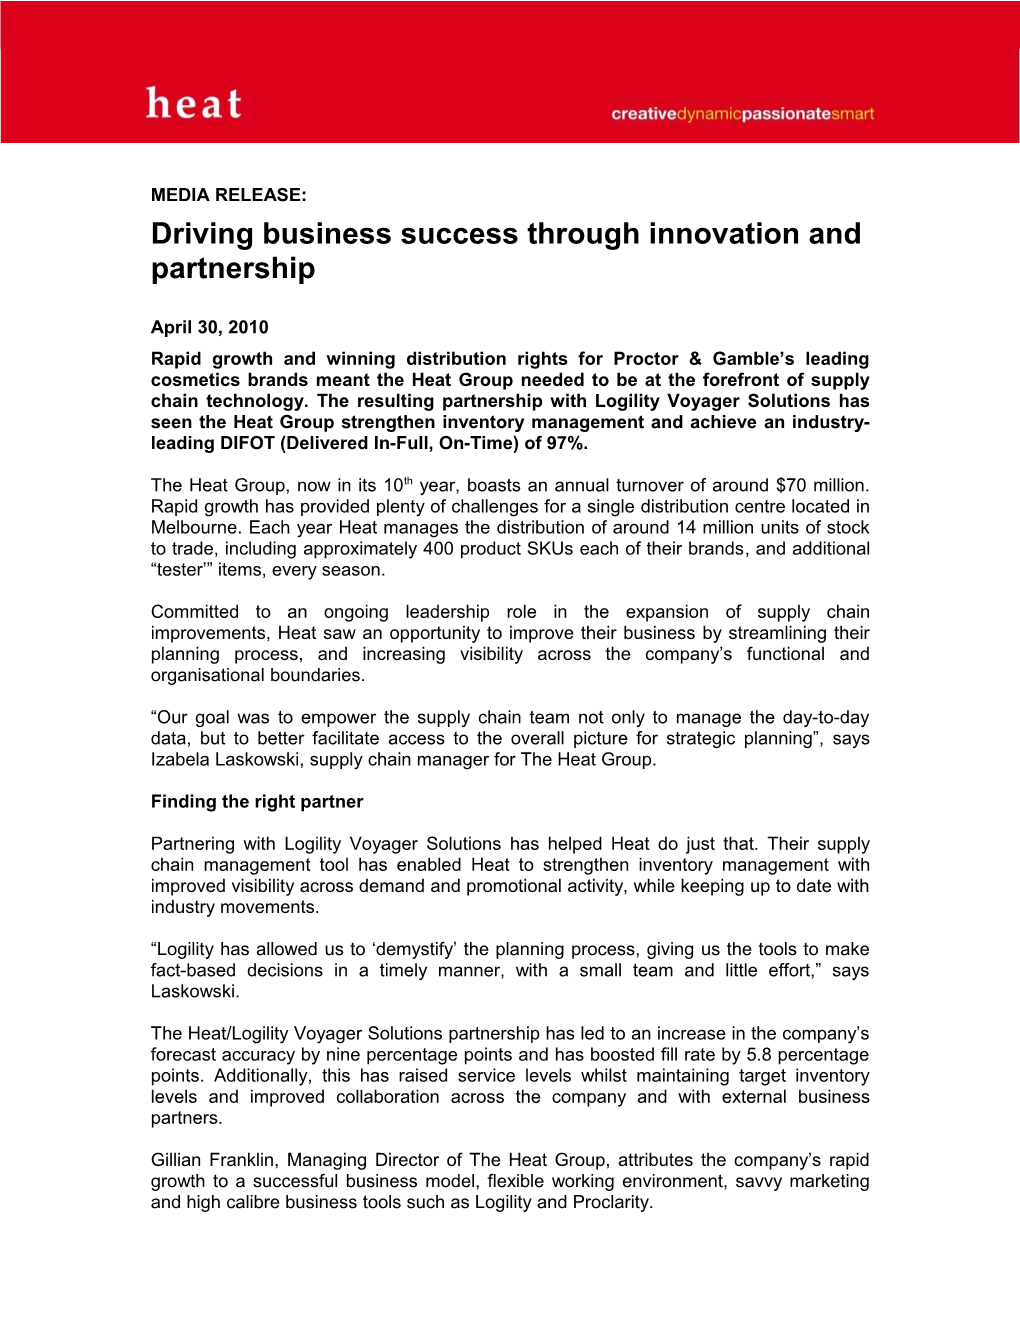 Driving Business Success Through Innovation and Partnership